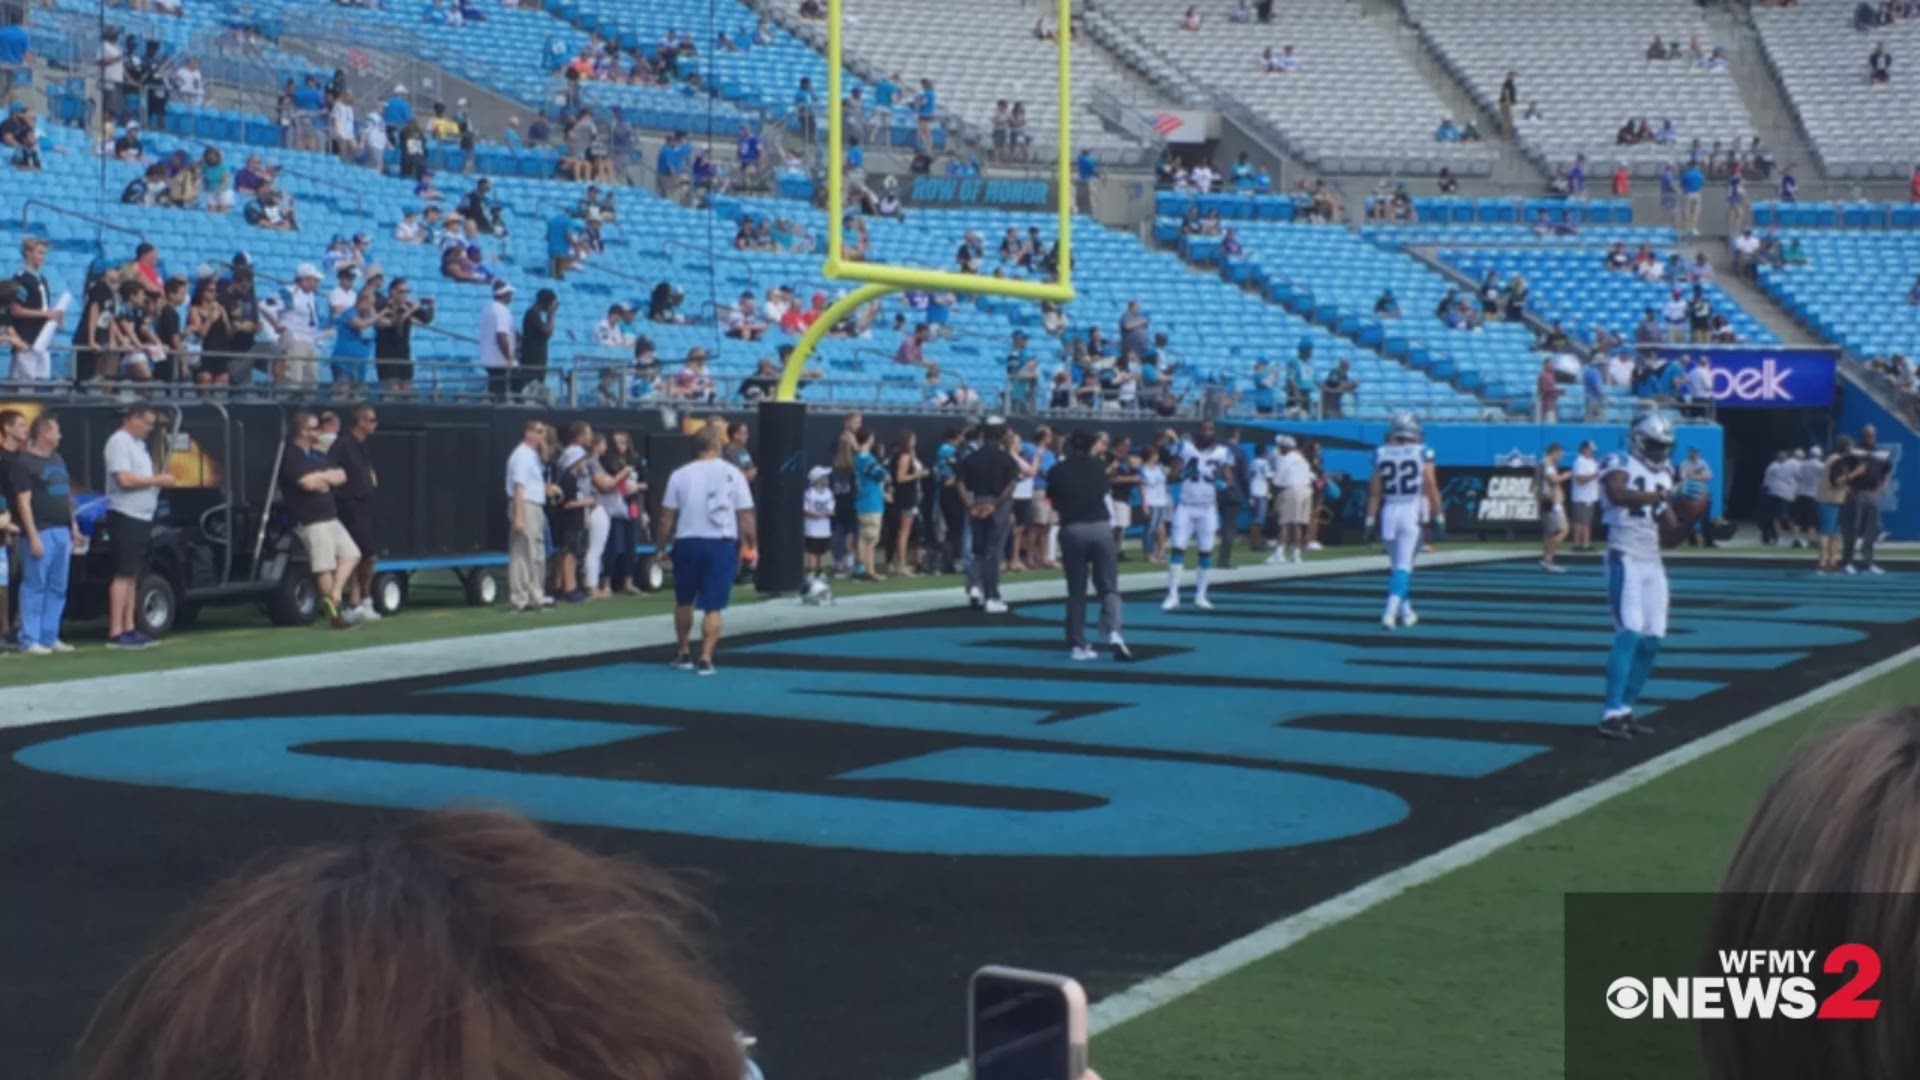 Panthers Play Home Opener vs. Bills